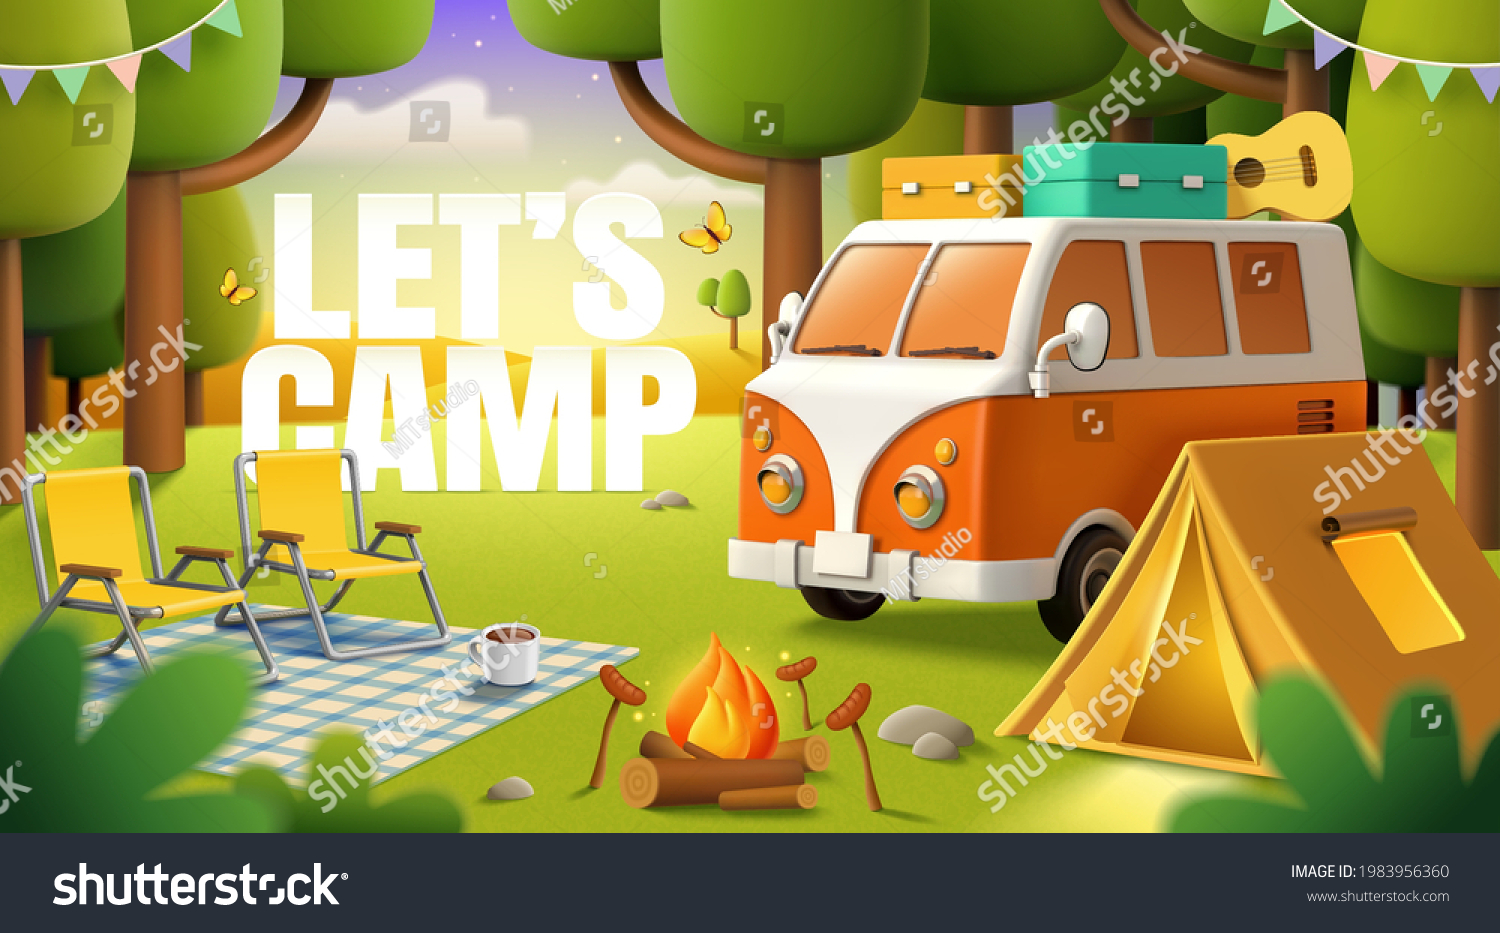 SVG of Cute camper van, tent, bonfire and outdoor picnic equipment settled in the forest. Concept of wanderlust, travel, and camping adventure. 3d illustration. svg